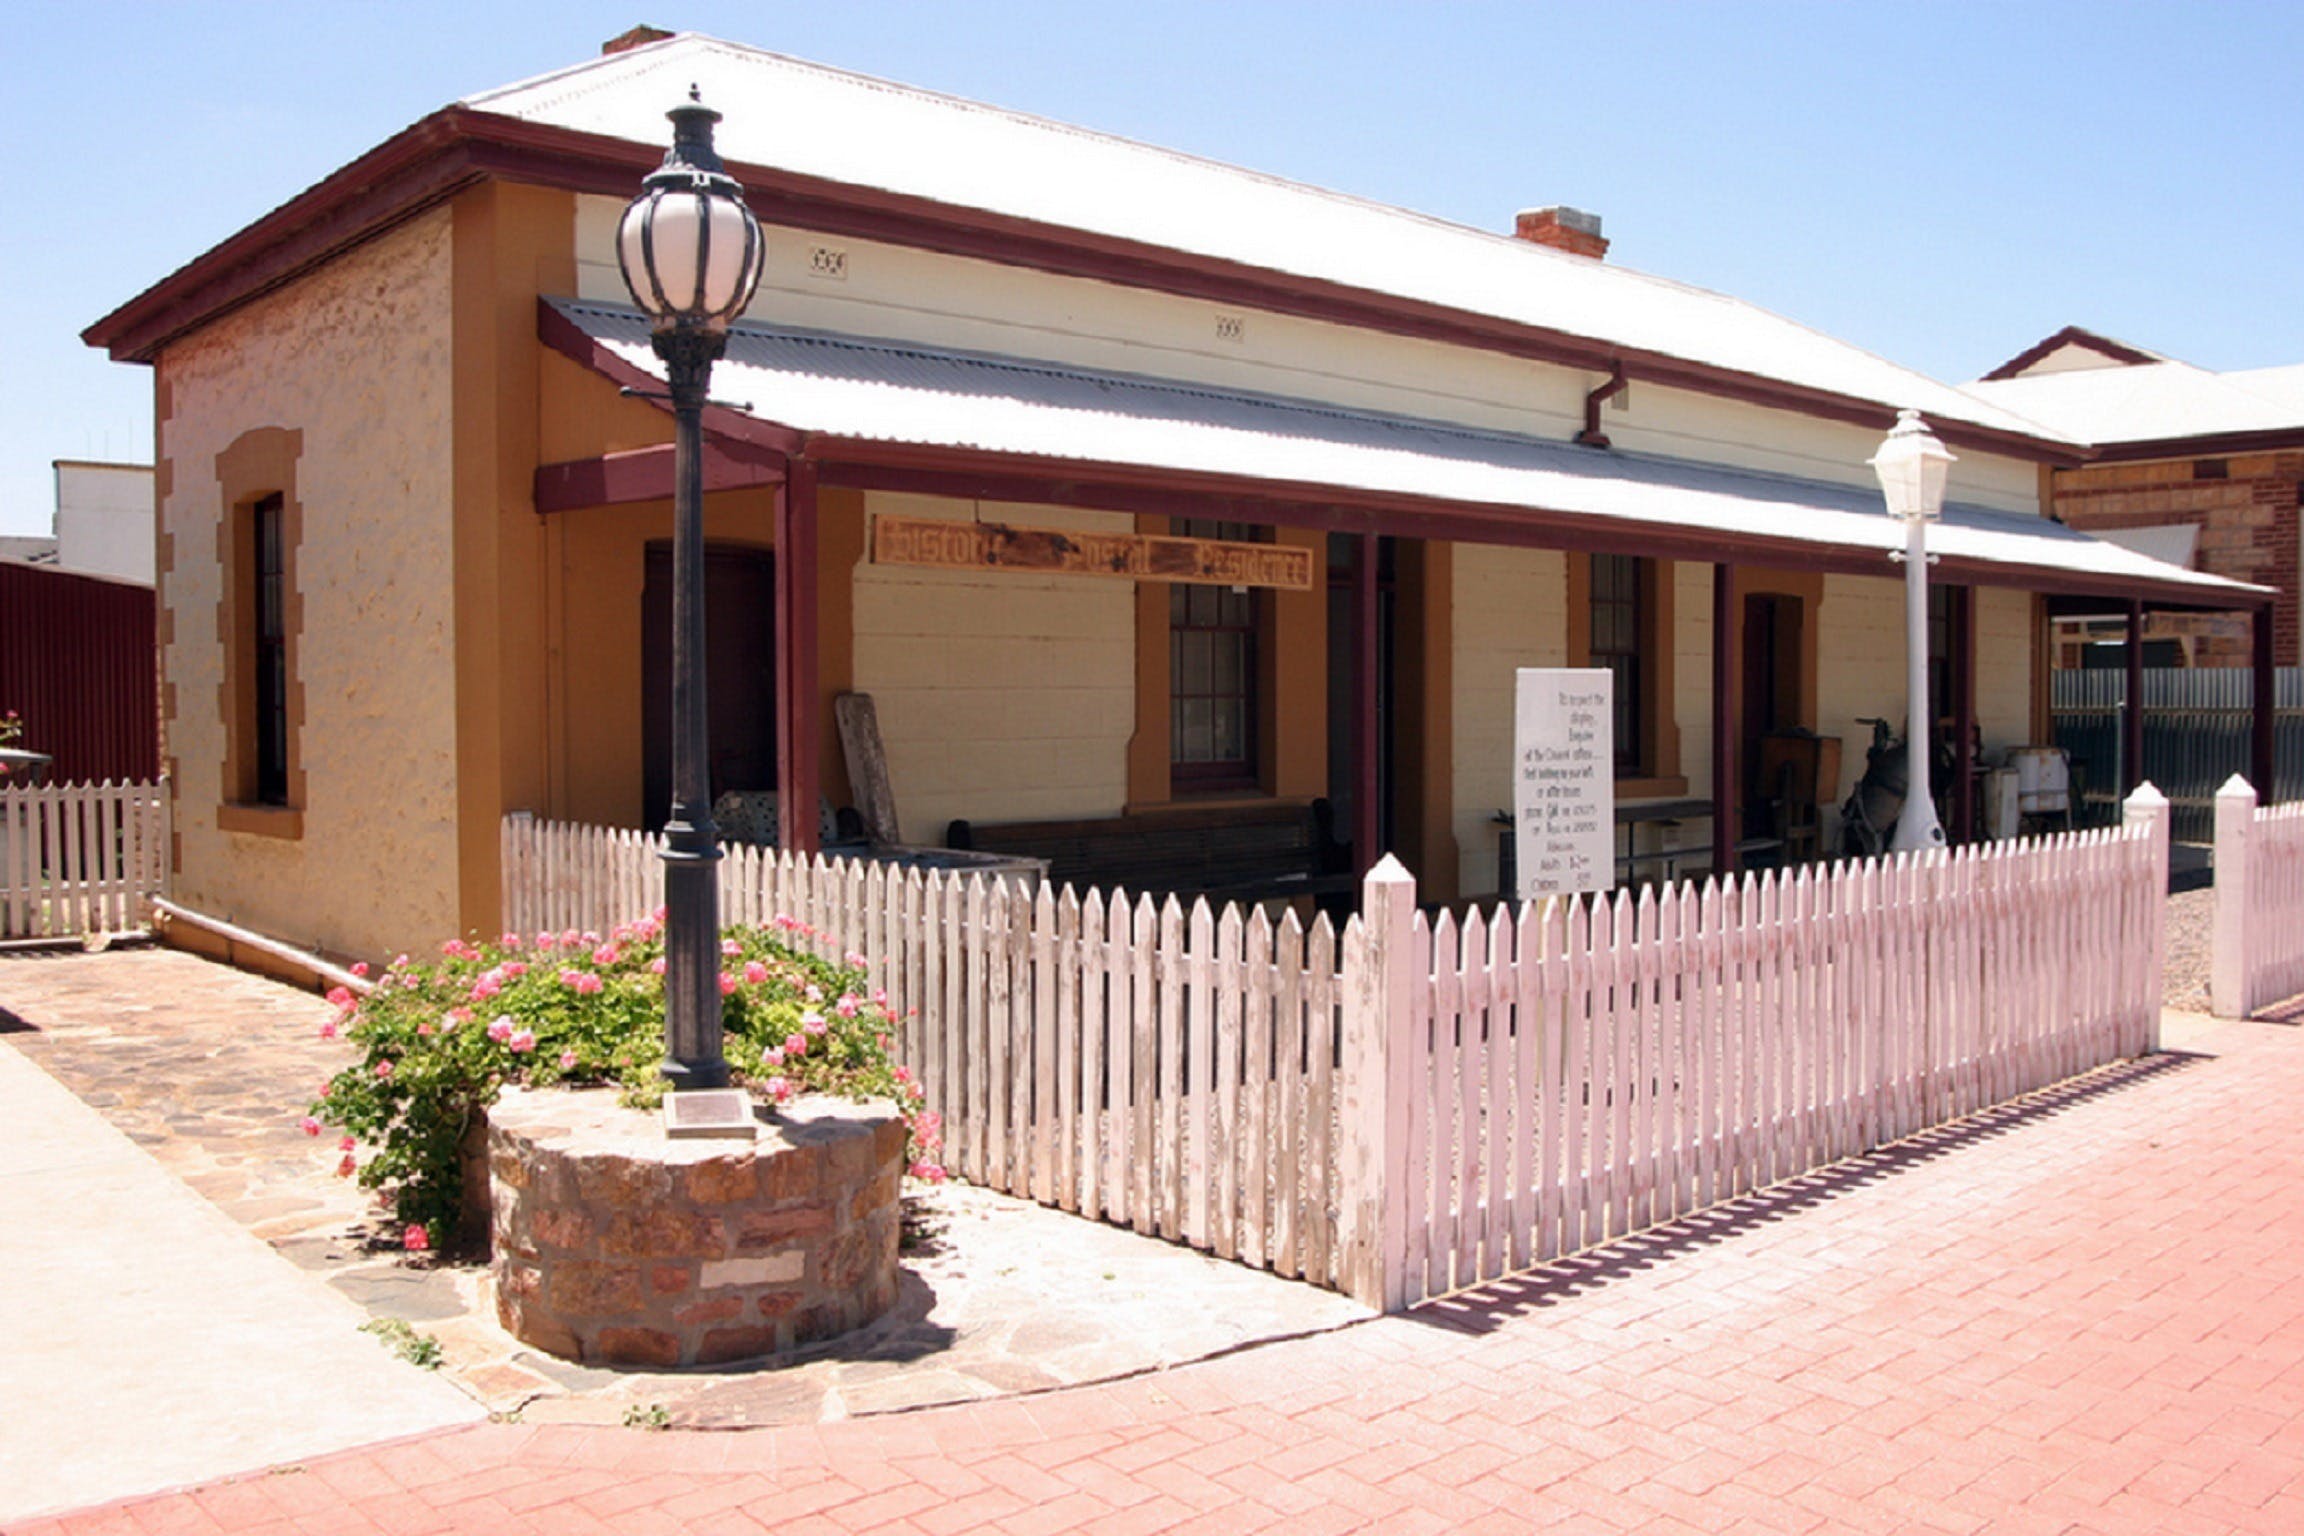 Franklin Harbour Historical Museum - WA Accommodation